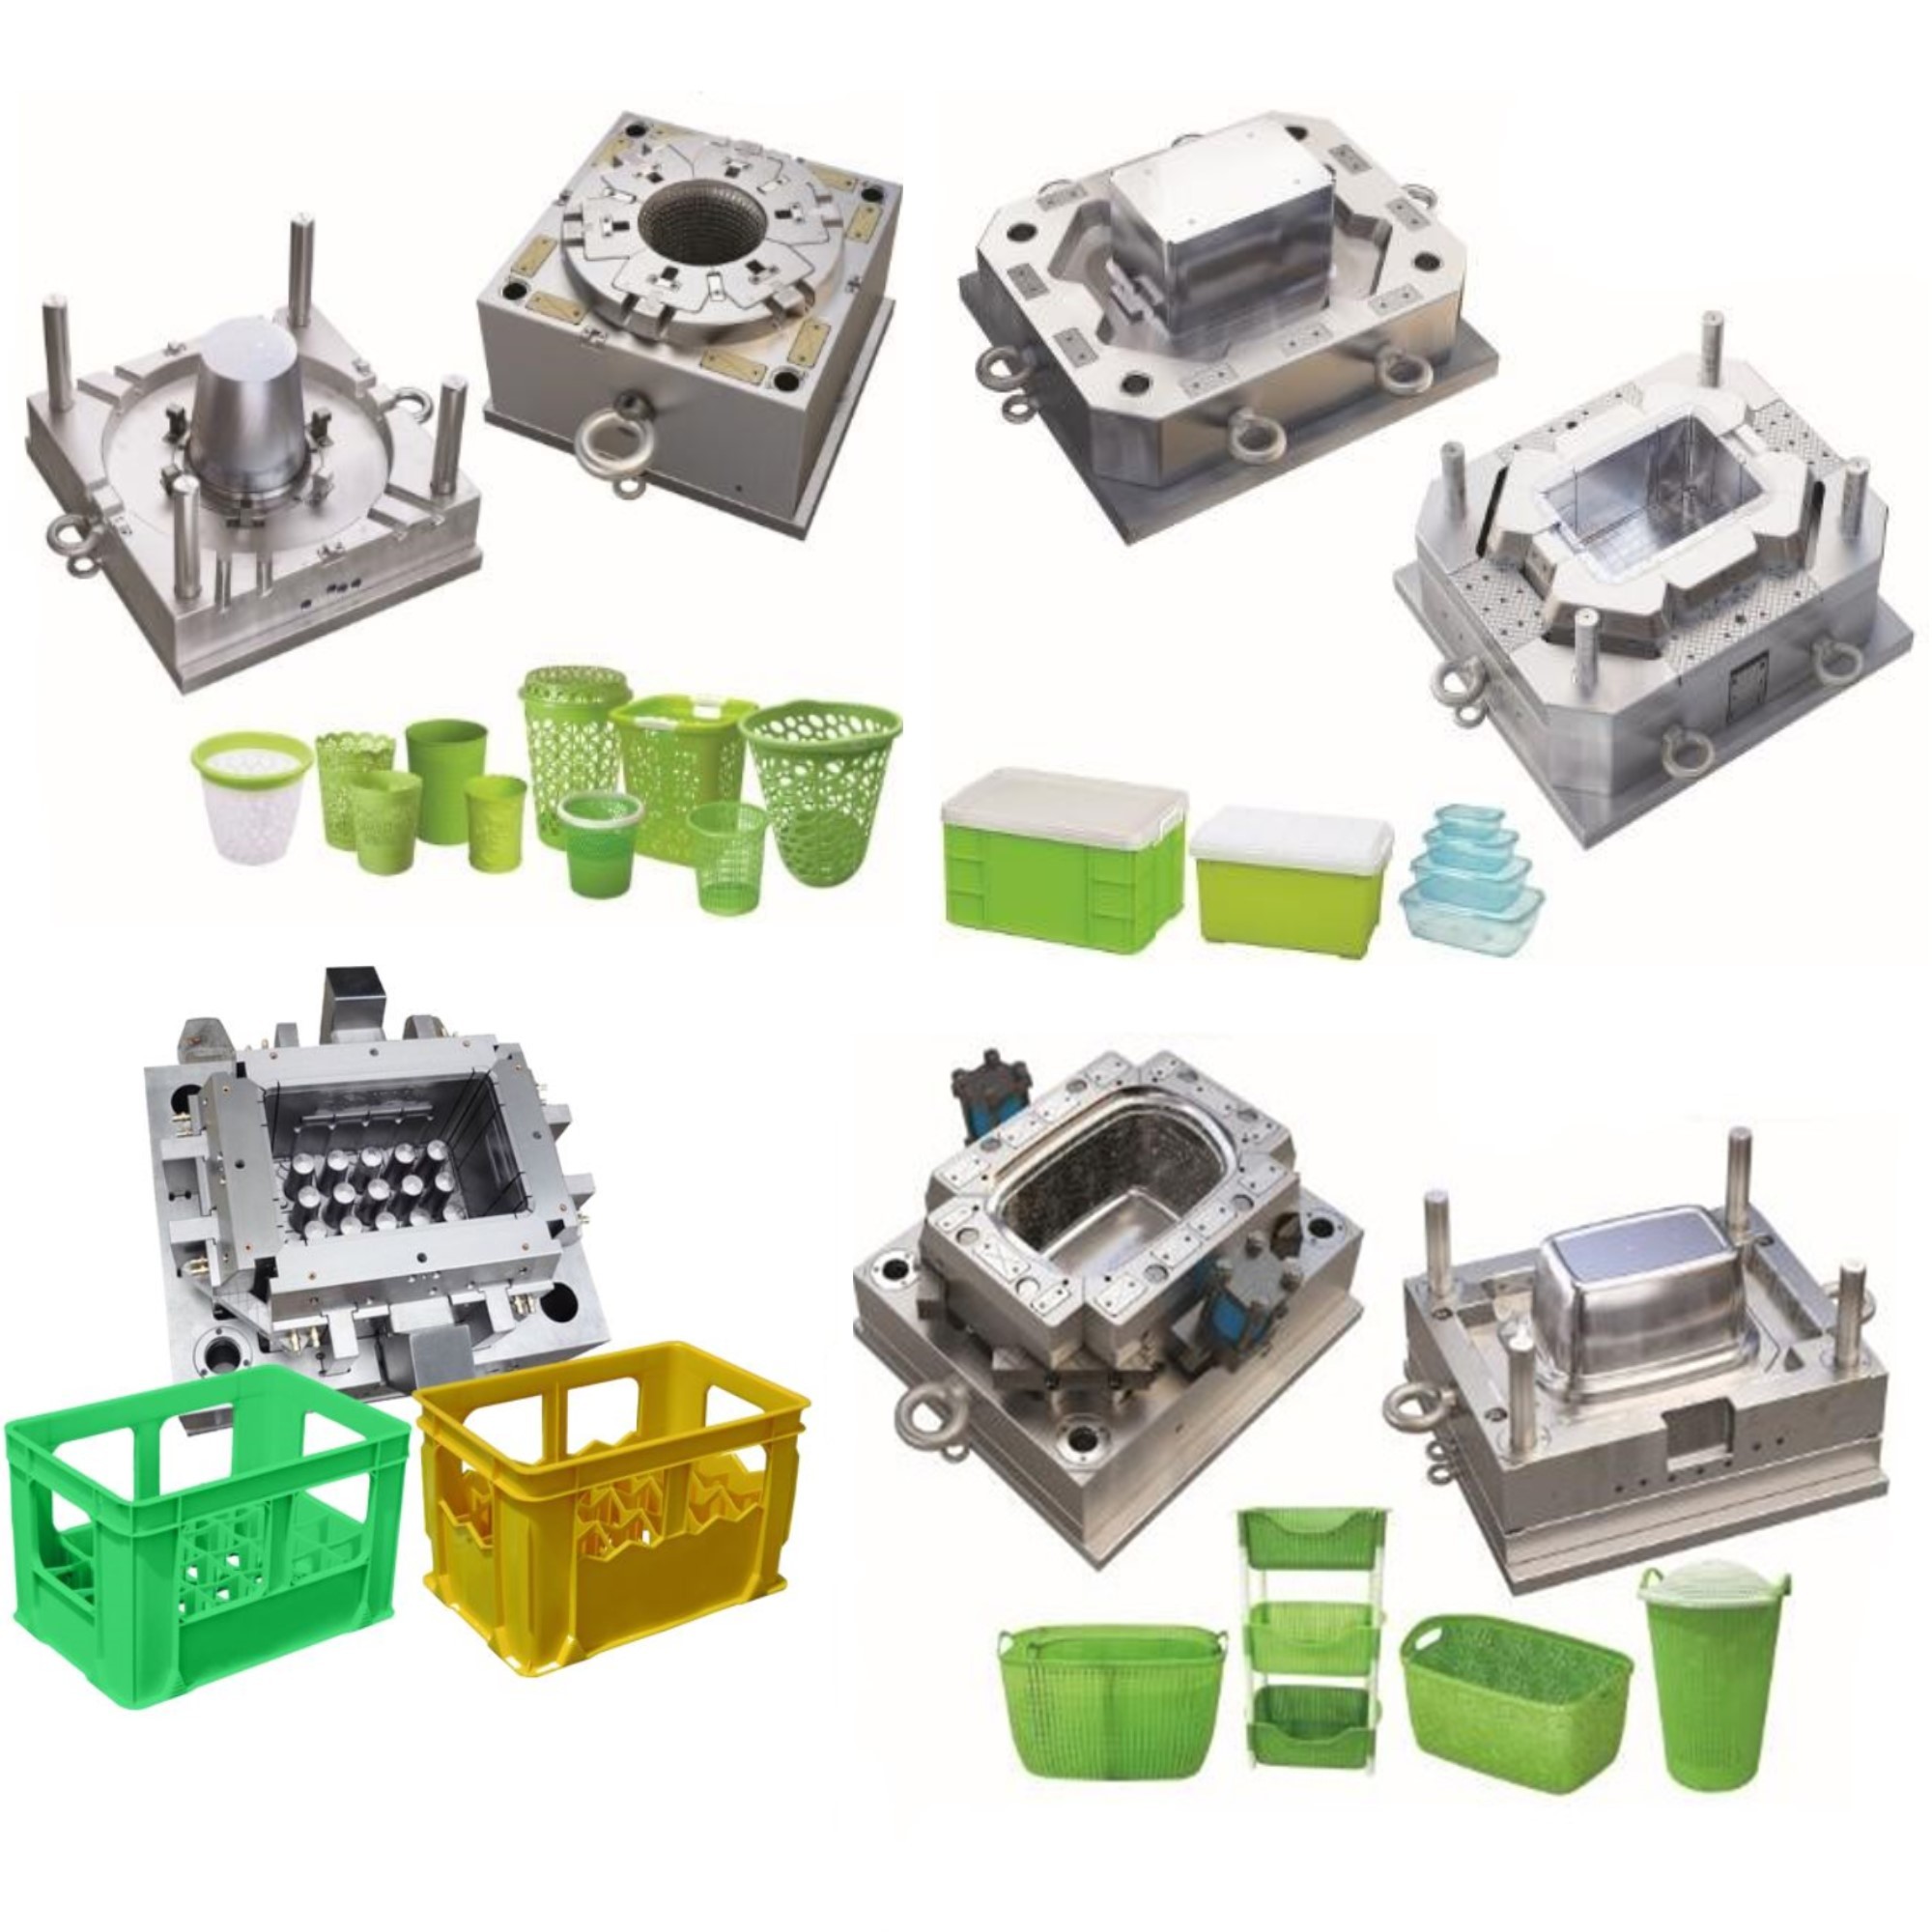  Texture Finish Precision Silicone Rubber Injection Molding Pantone Manufactures